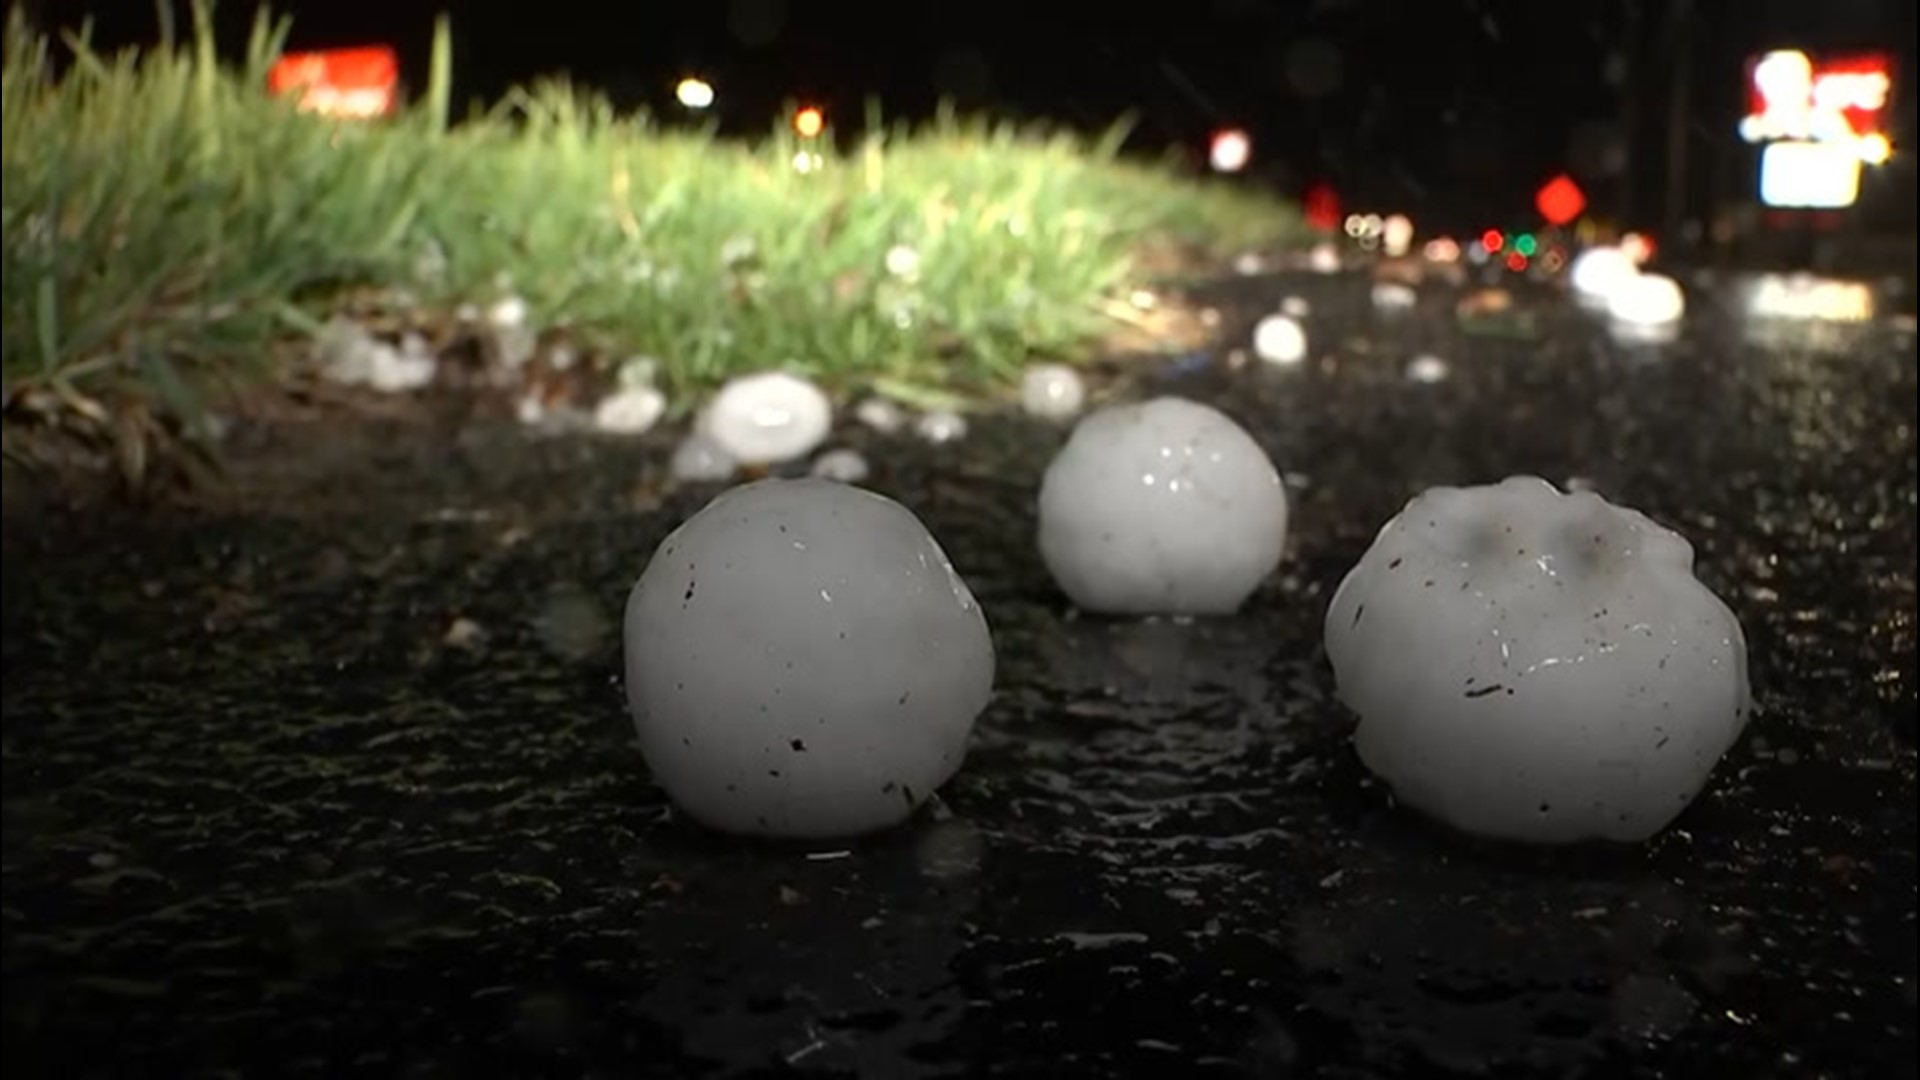 Thunderstorms packed with large hail and torrential rain drenched parts of Michigan and Ohio on April 7. AccuWeather storm chaser Blake Naftel was out tracking the storms and has this overview.